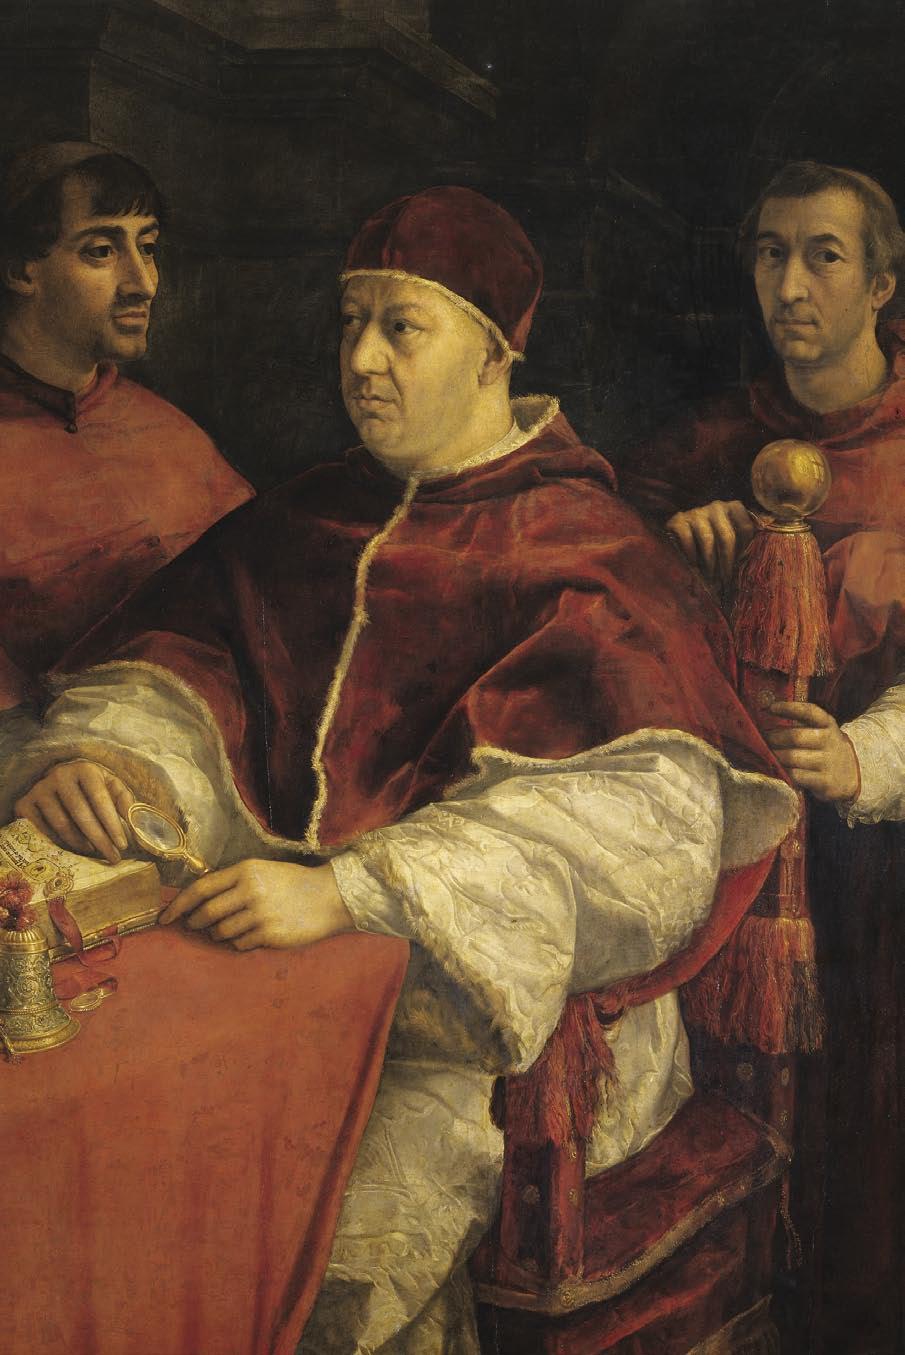 Pope Leo X Chapter 1 Silence That Priest! PPope Leo X was annoyed with Martin Luther. The uproar about this German priest and the criticisms of the Catholic Church were a distraction.